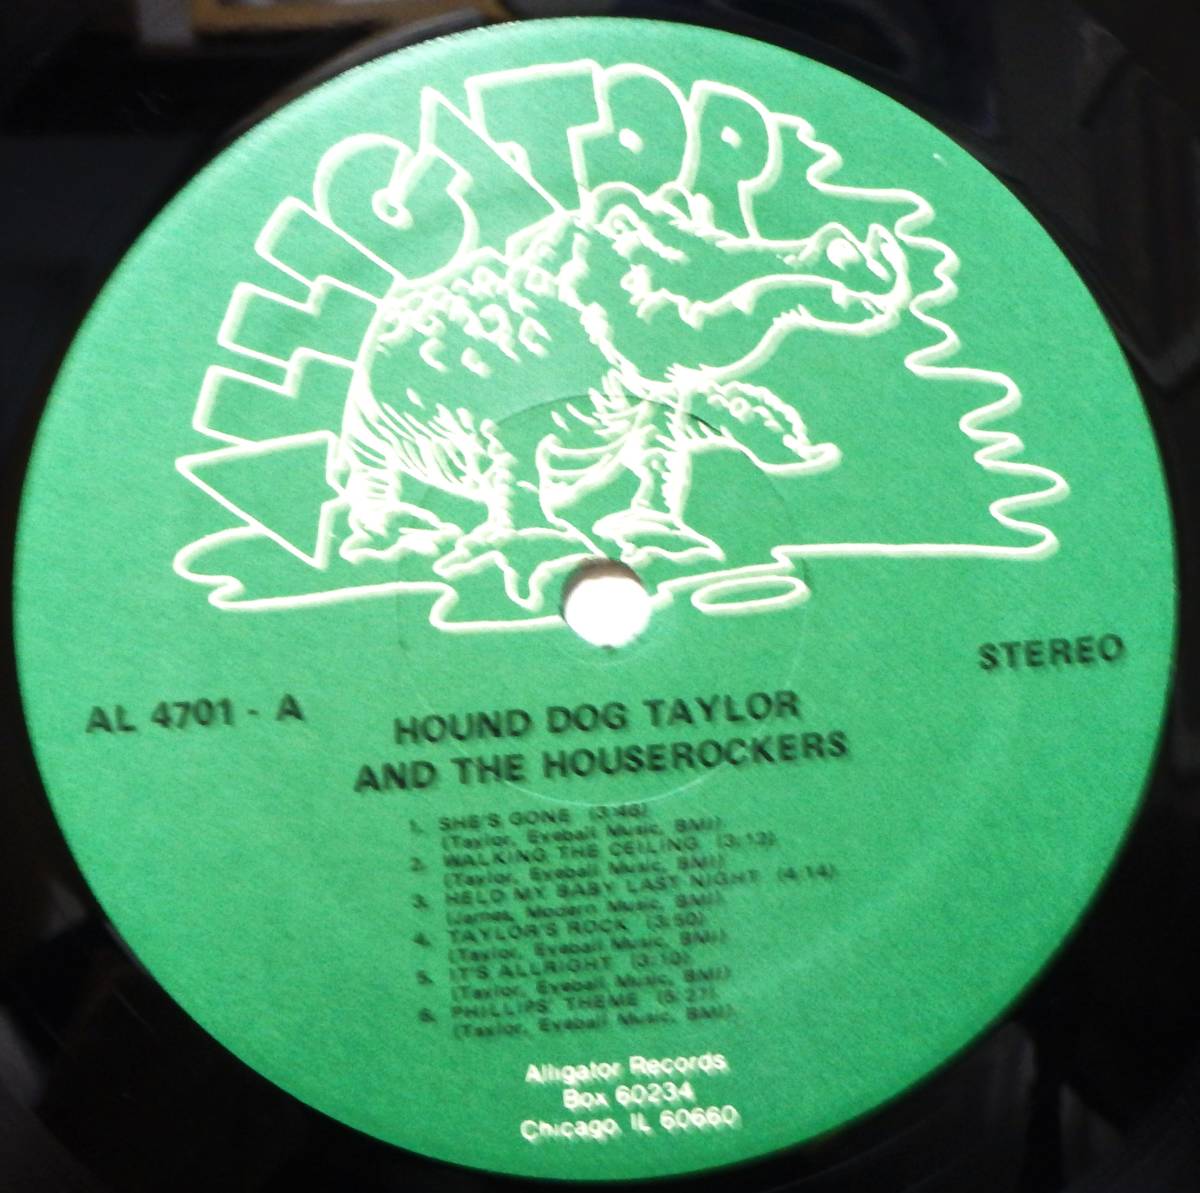 [BB100]HOUND DOG TAYLOR & THE HOUSEROCKERS[Same], US Reissue * Chicago * blues 